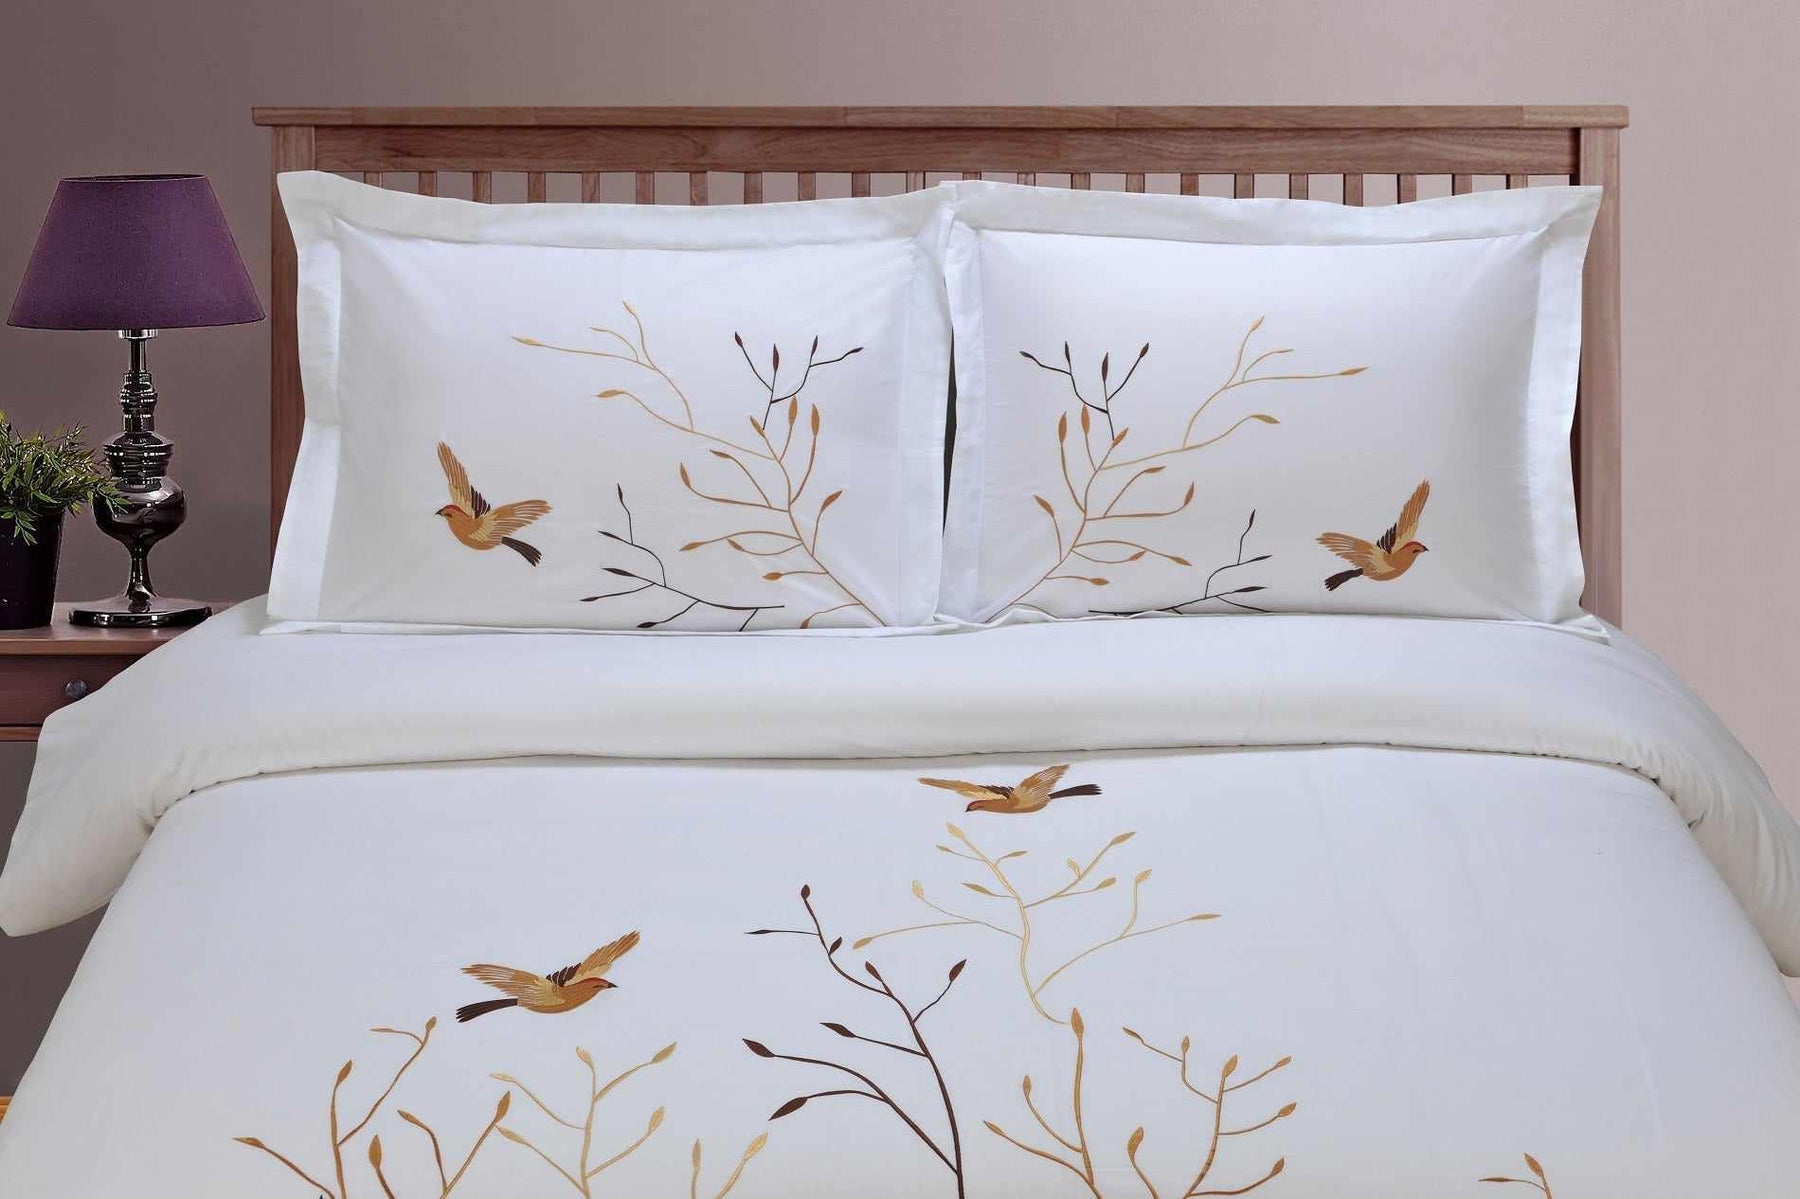 Superior Embroidered Swallow and Floral Cotton Duvet Cover Set - Gold